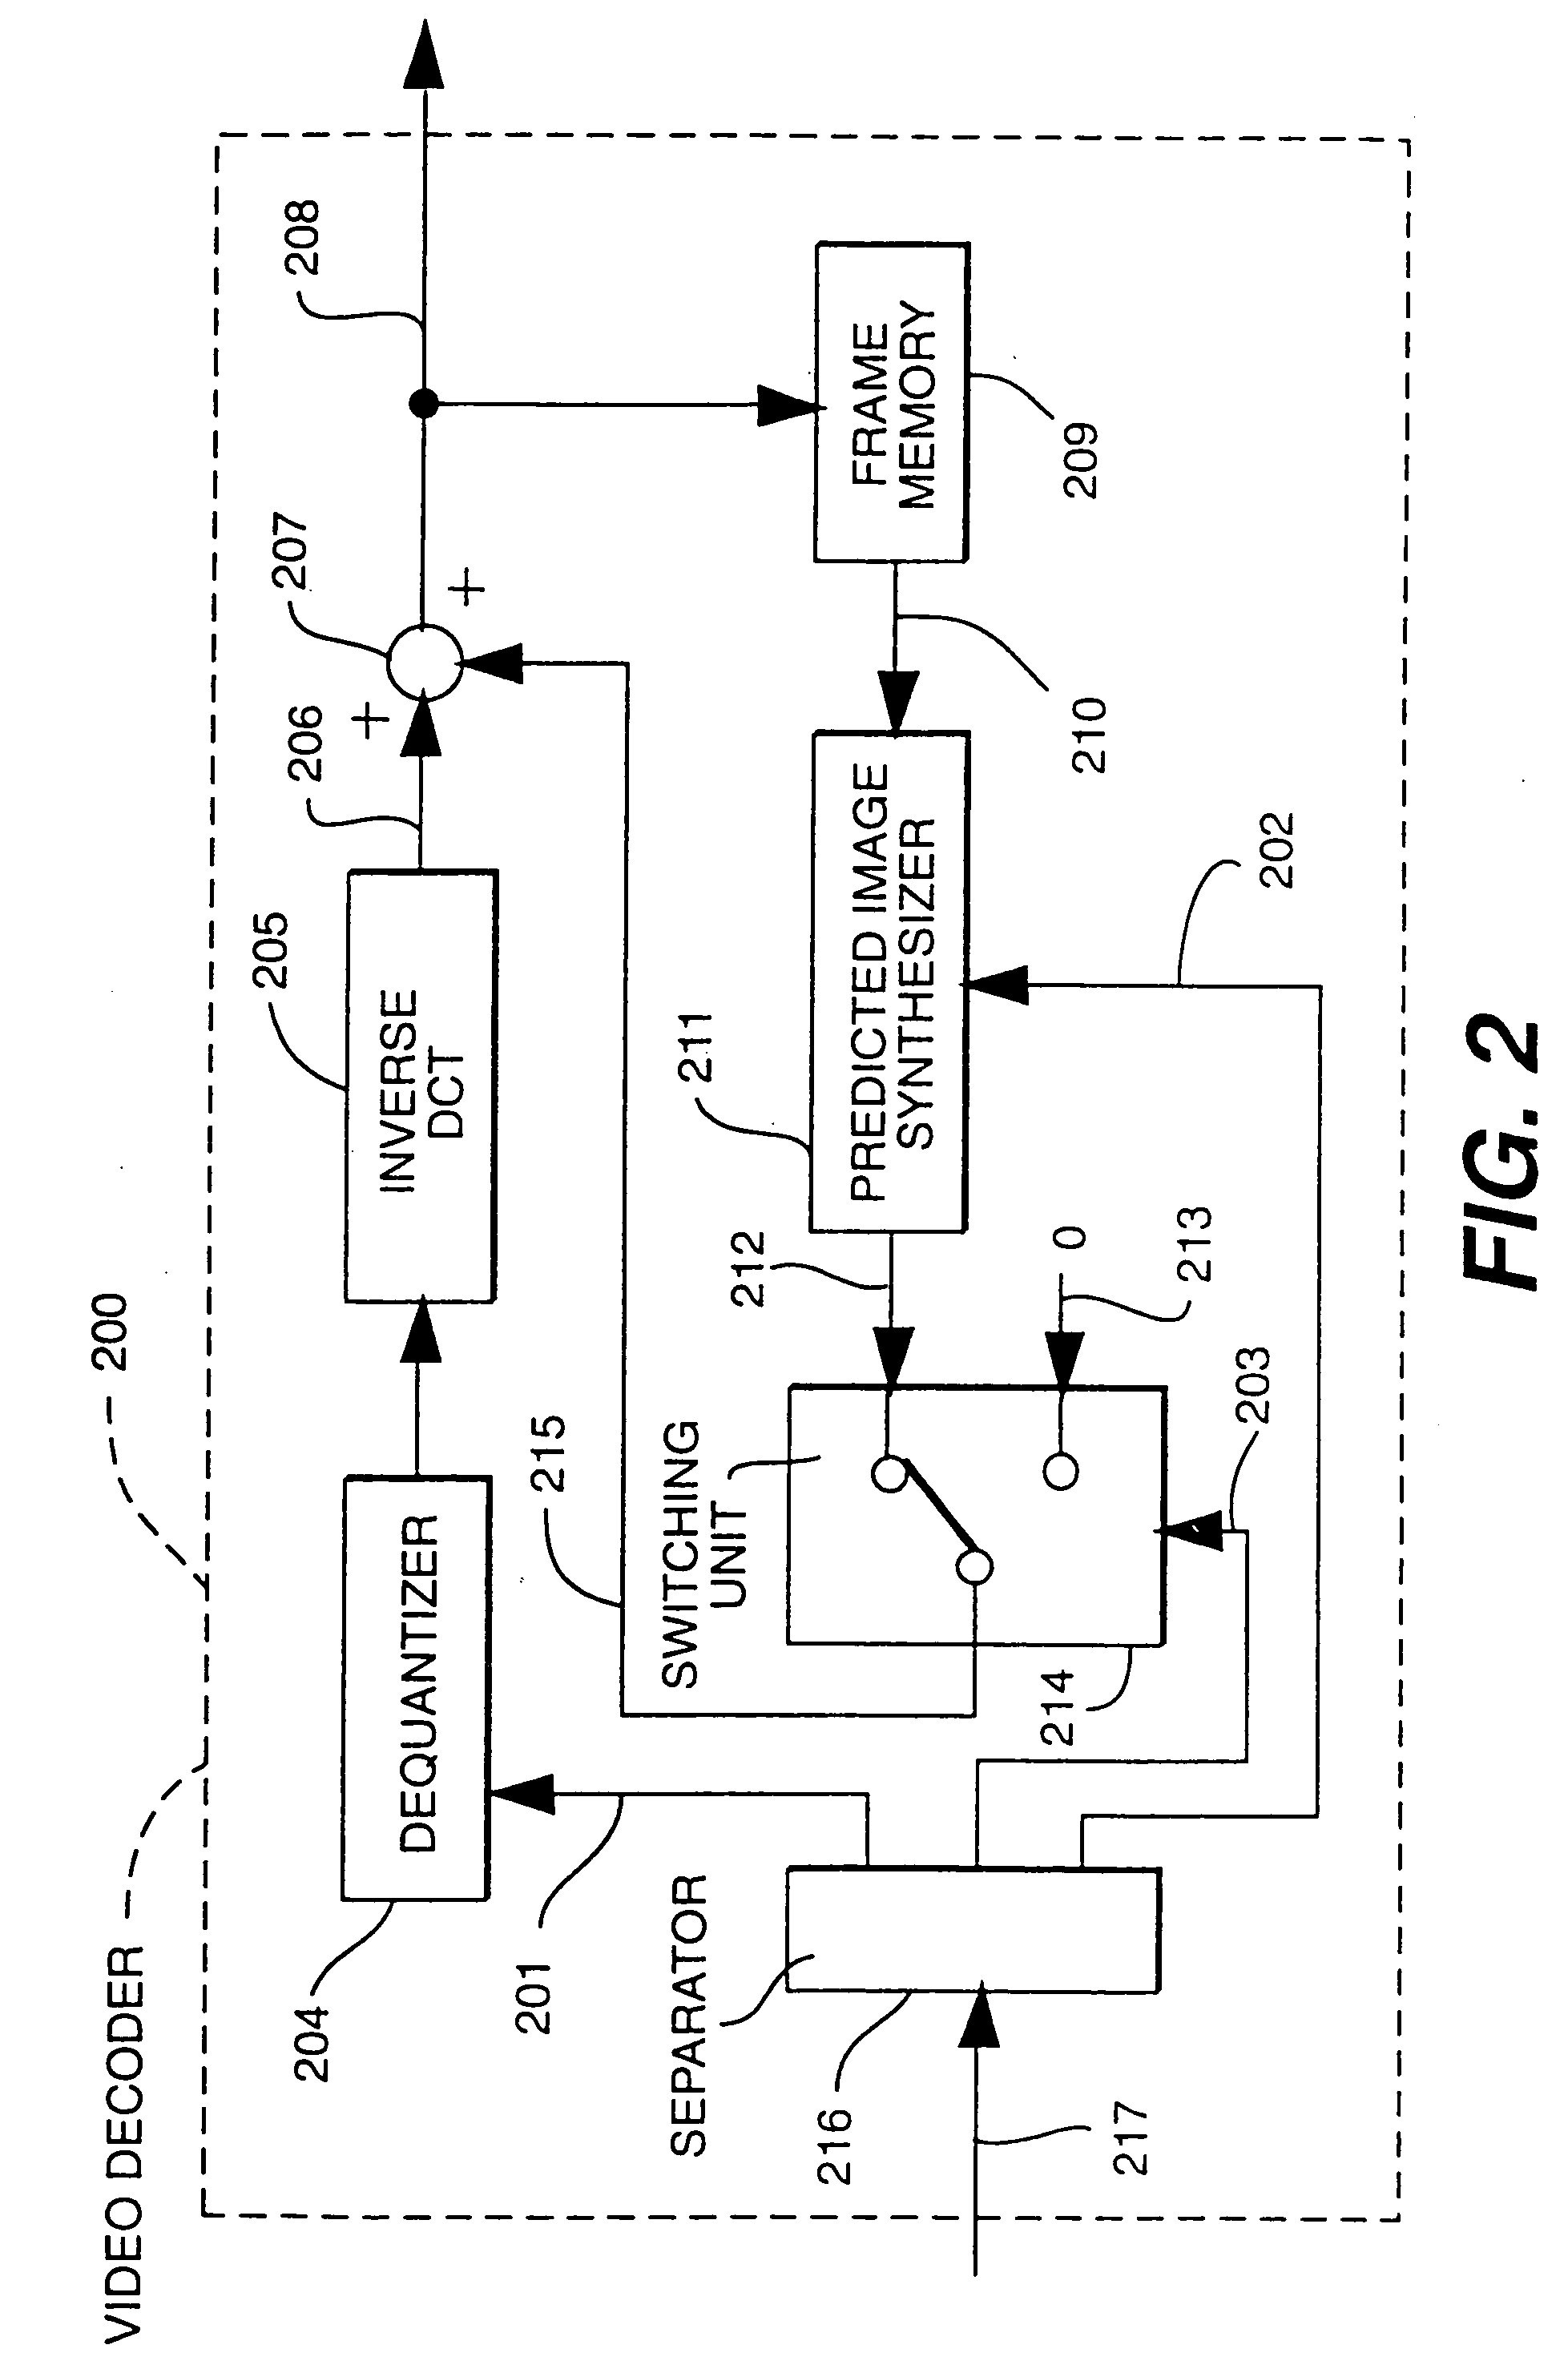 Method of coding and decoding image